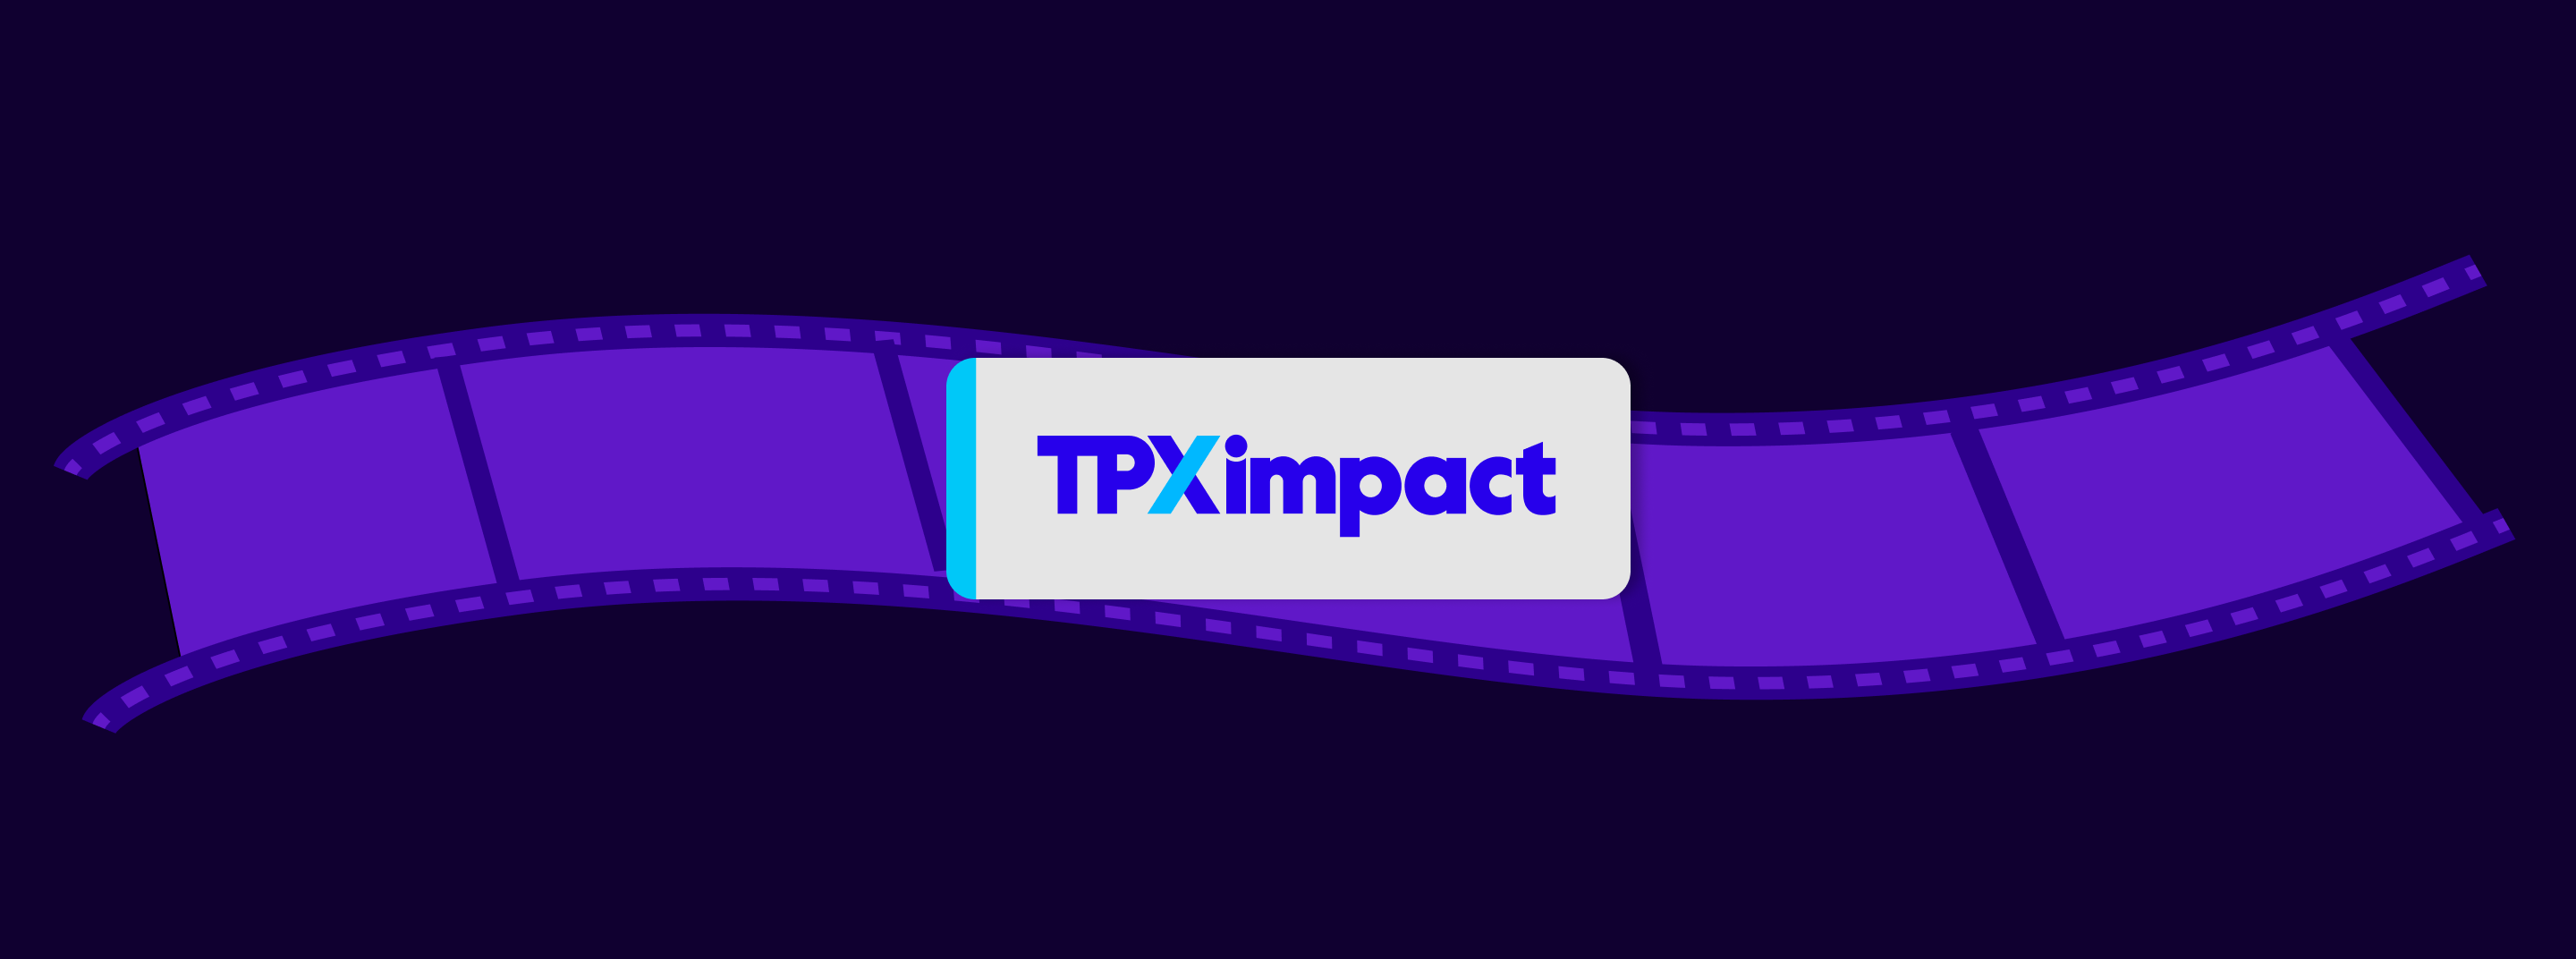 TPXimpact logo on an illustrated roll of film